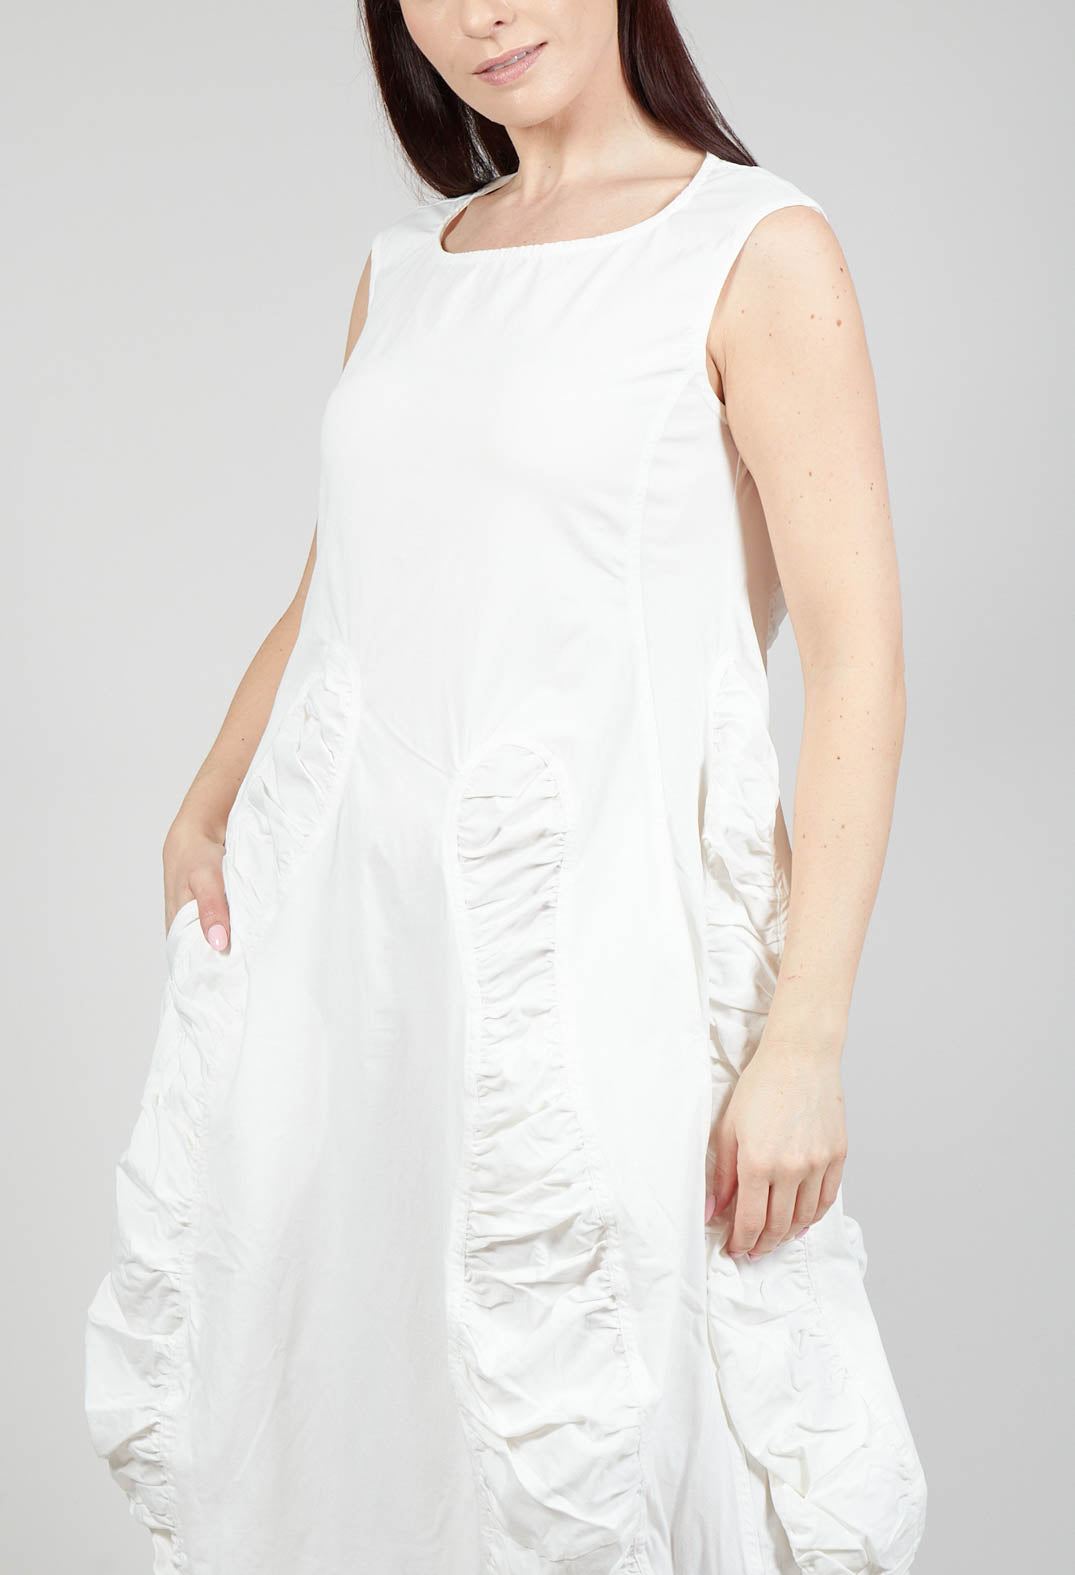 Ruched Dress in Starwhite